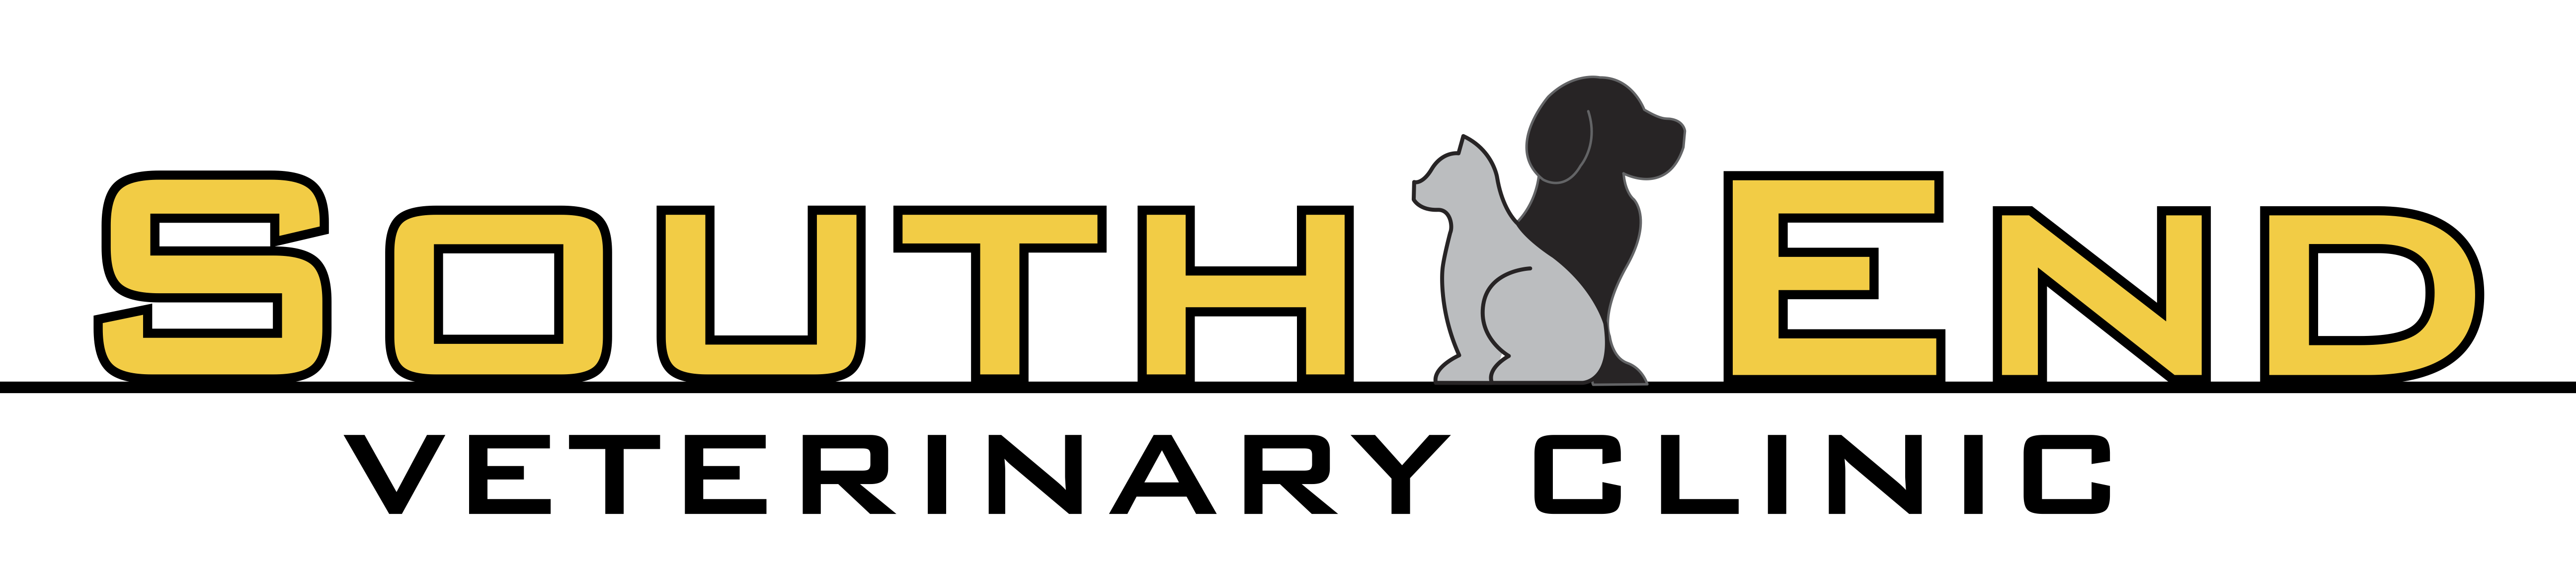 South End Veterinary Clinic